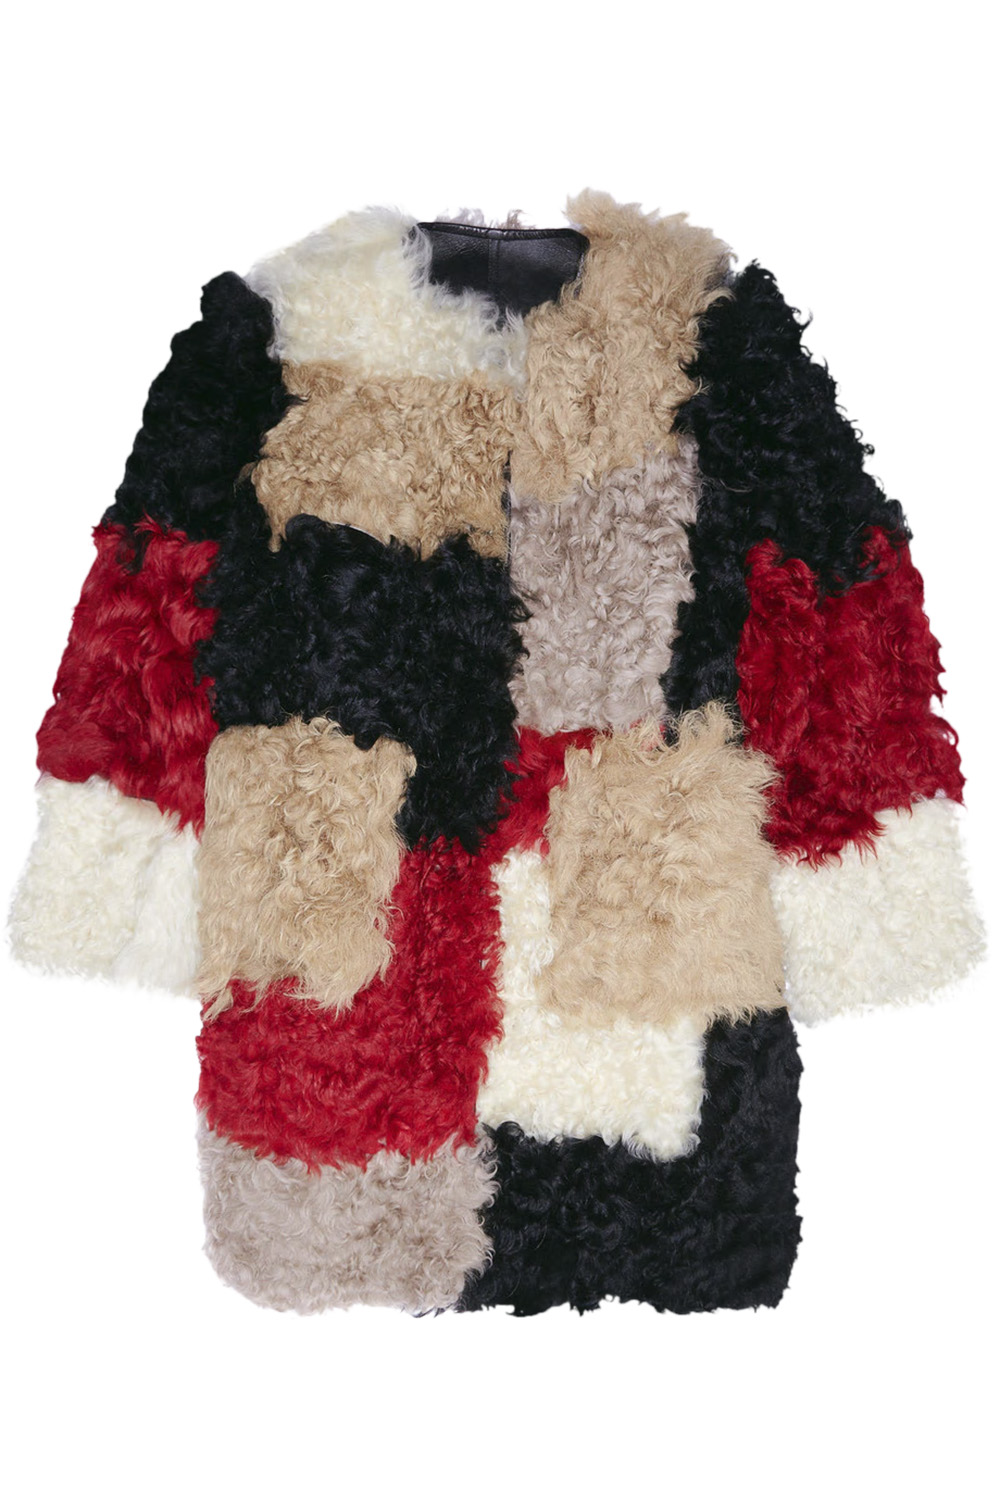 Marni coat, approx $9,350 from Net-a-porter.com.